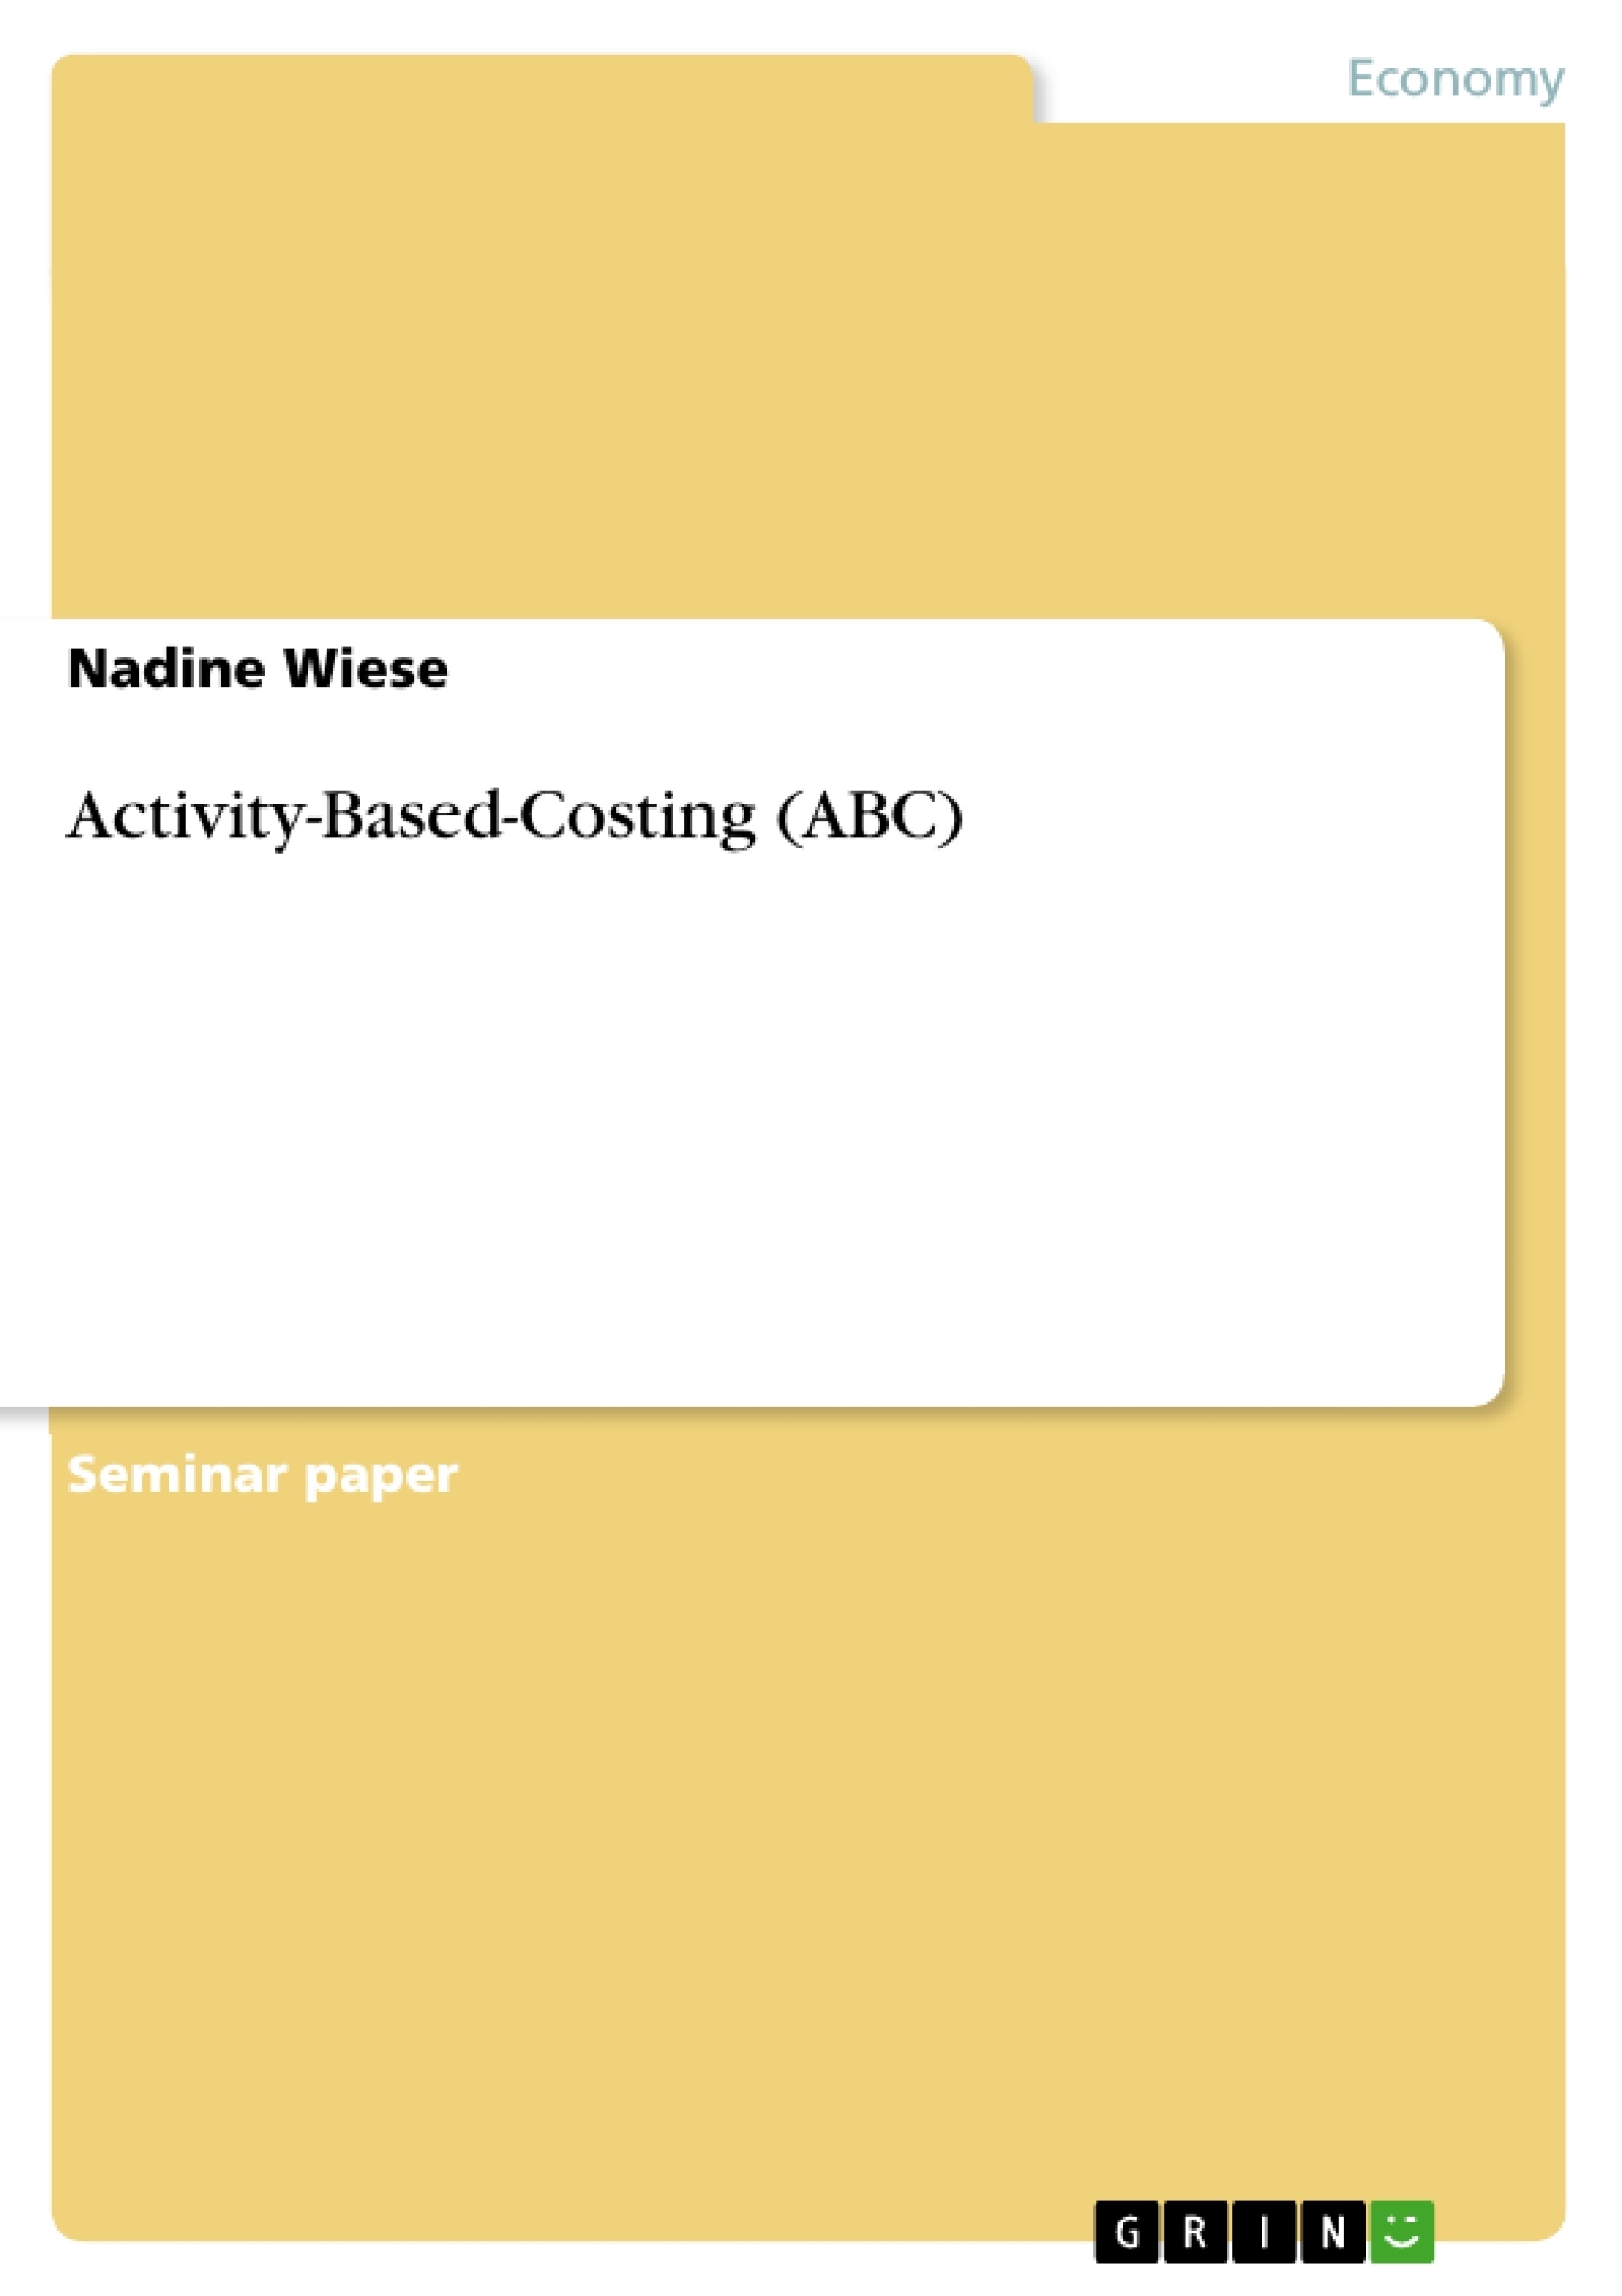 Title: Activity-Based-Costing (ABC)